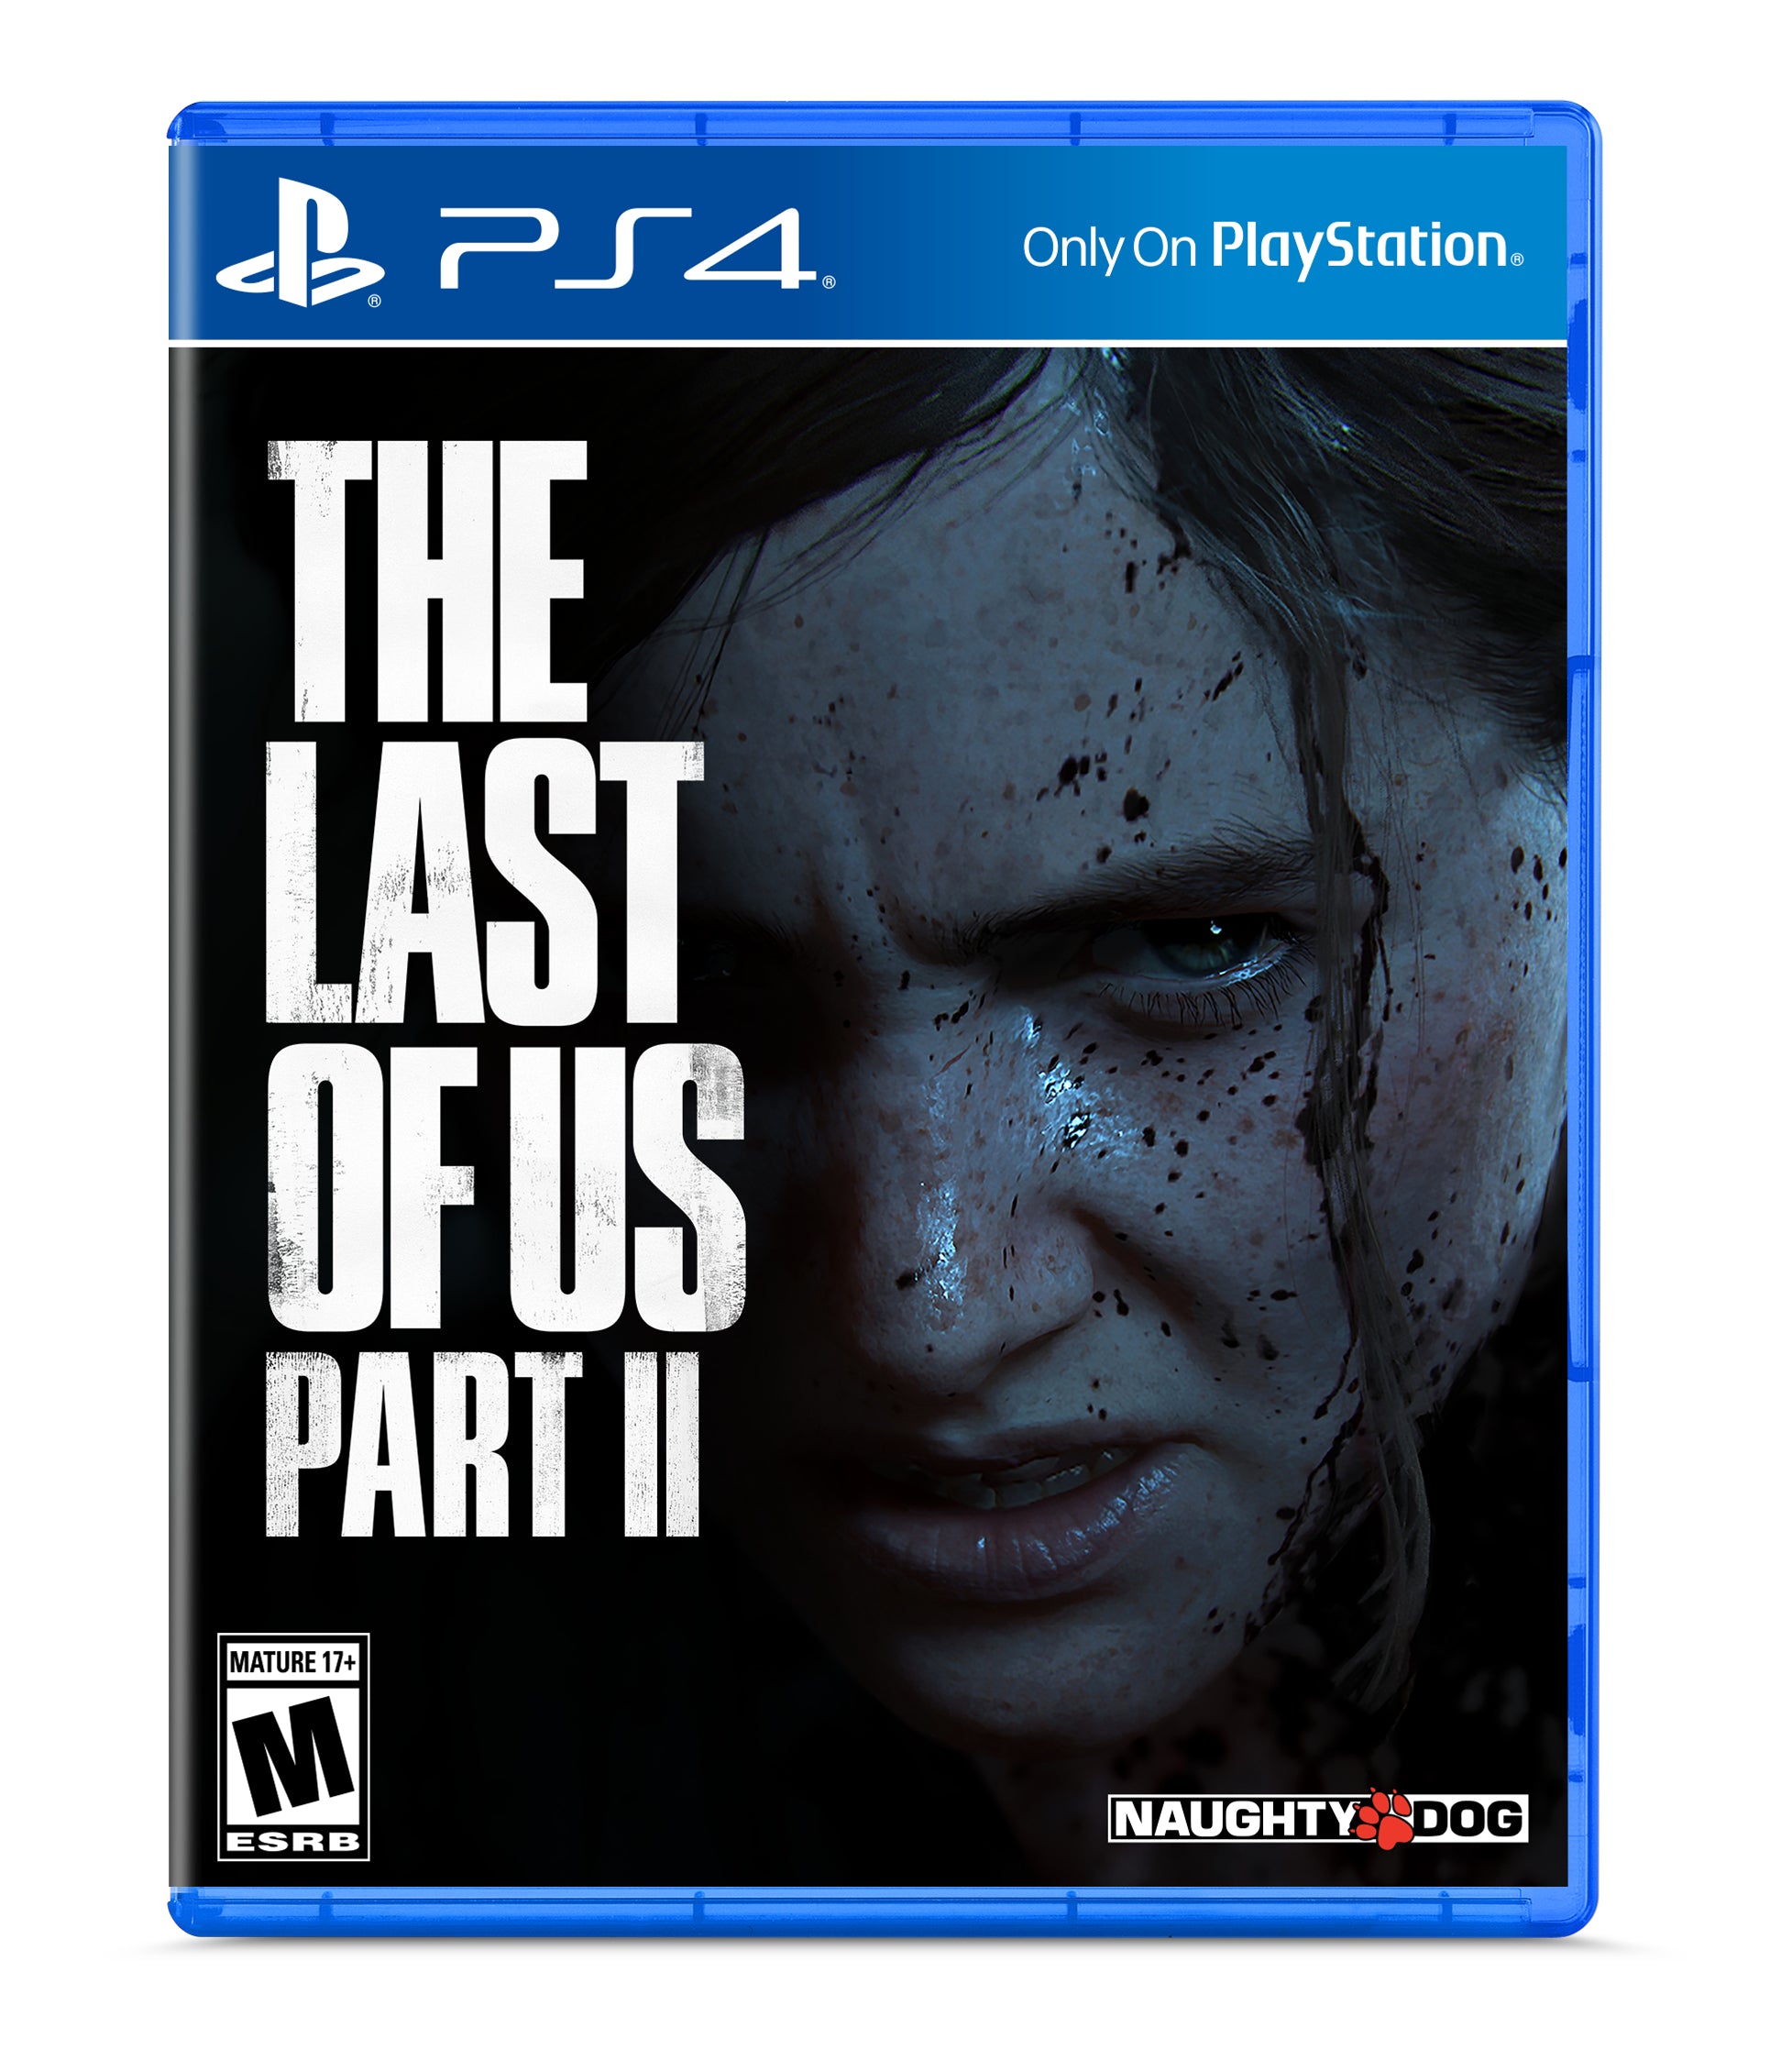 Sony PlayStation 4 Slim The Last of Us Part II Bundle Upgrade 1TB SSD PS4 Gaming Console, Jet Black, with Mytrix High Speed HDMI - Internal Fast Solid State Drive Enhanced PS4 Console